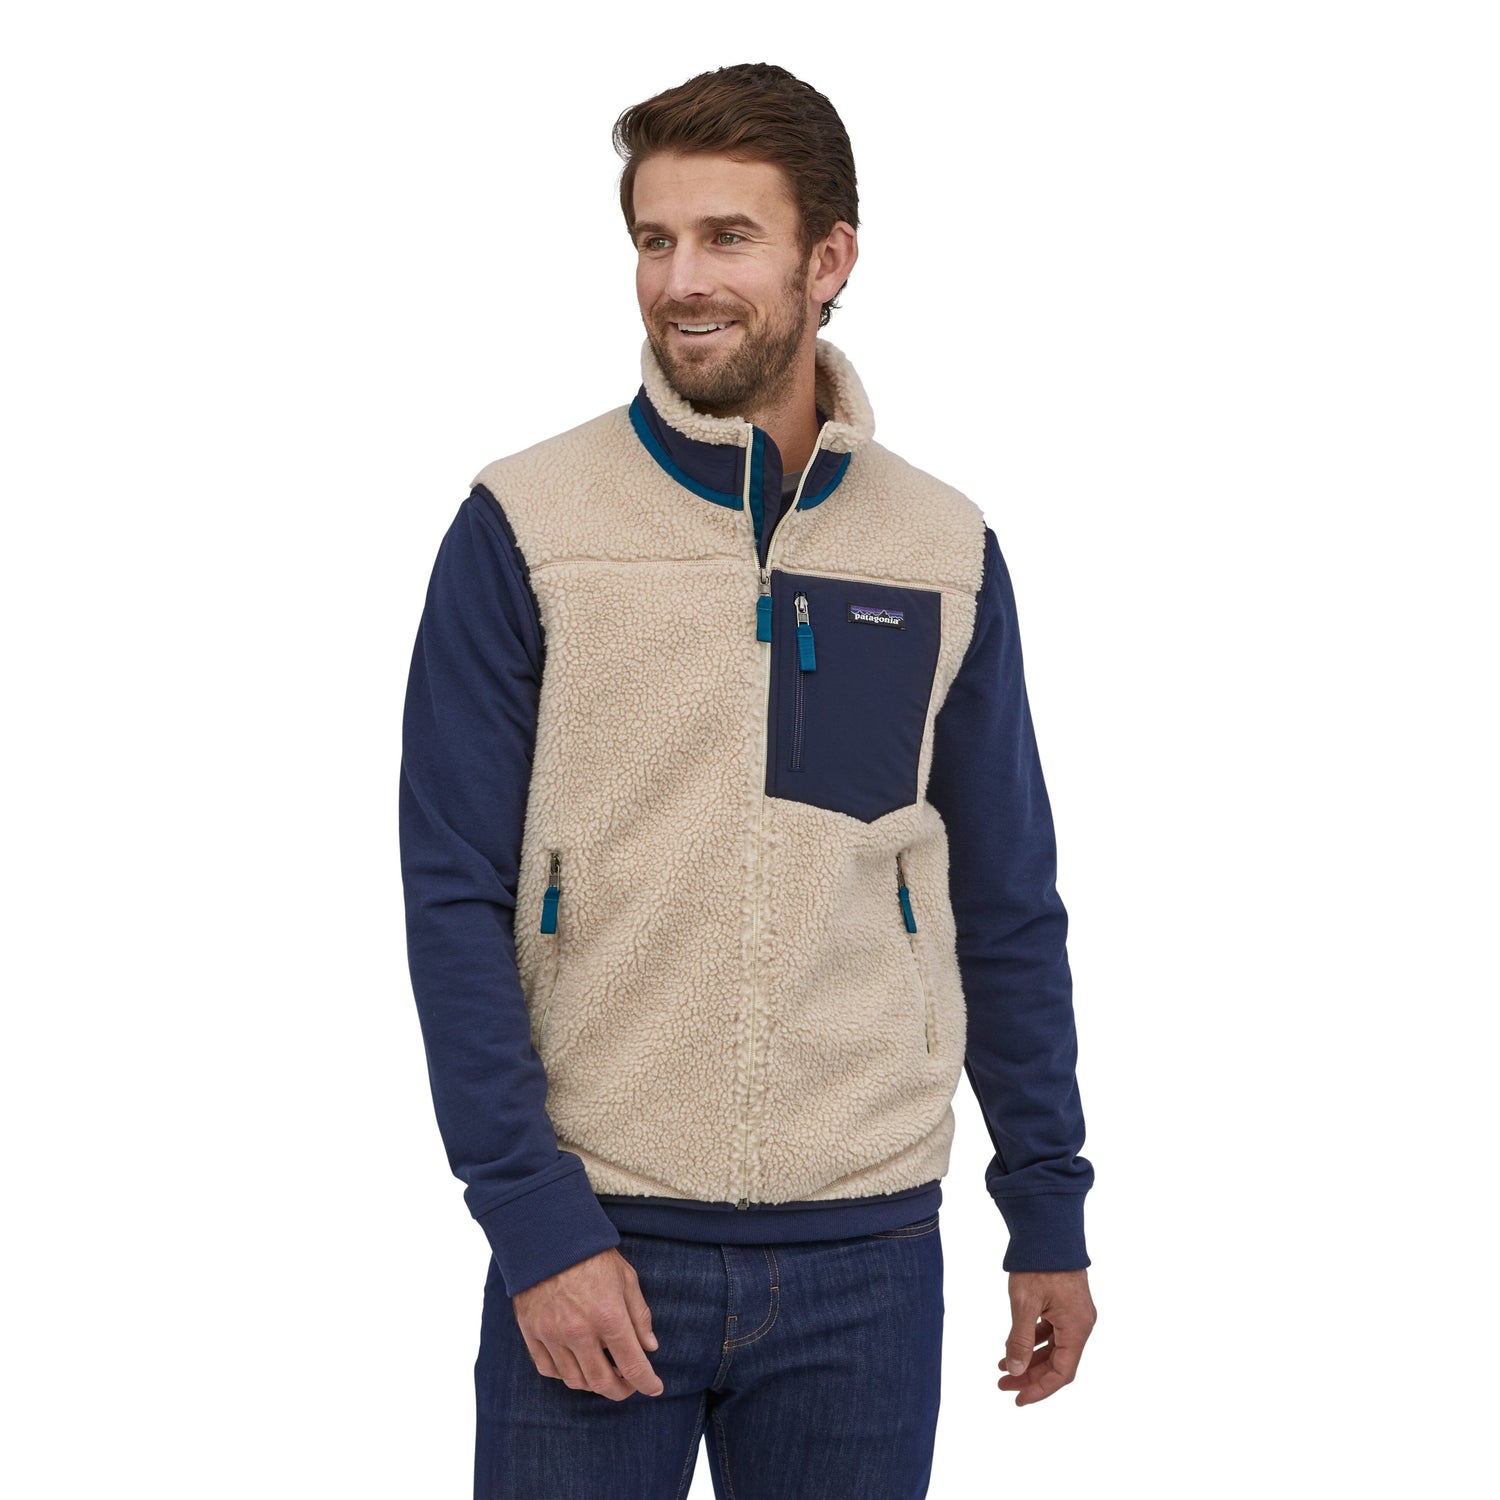 Patagonia - M's Classic Retro-X Fleece Vest - Recycled Polyester - Weekendbee - sustainable sportswear